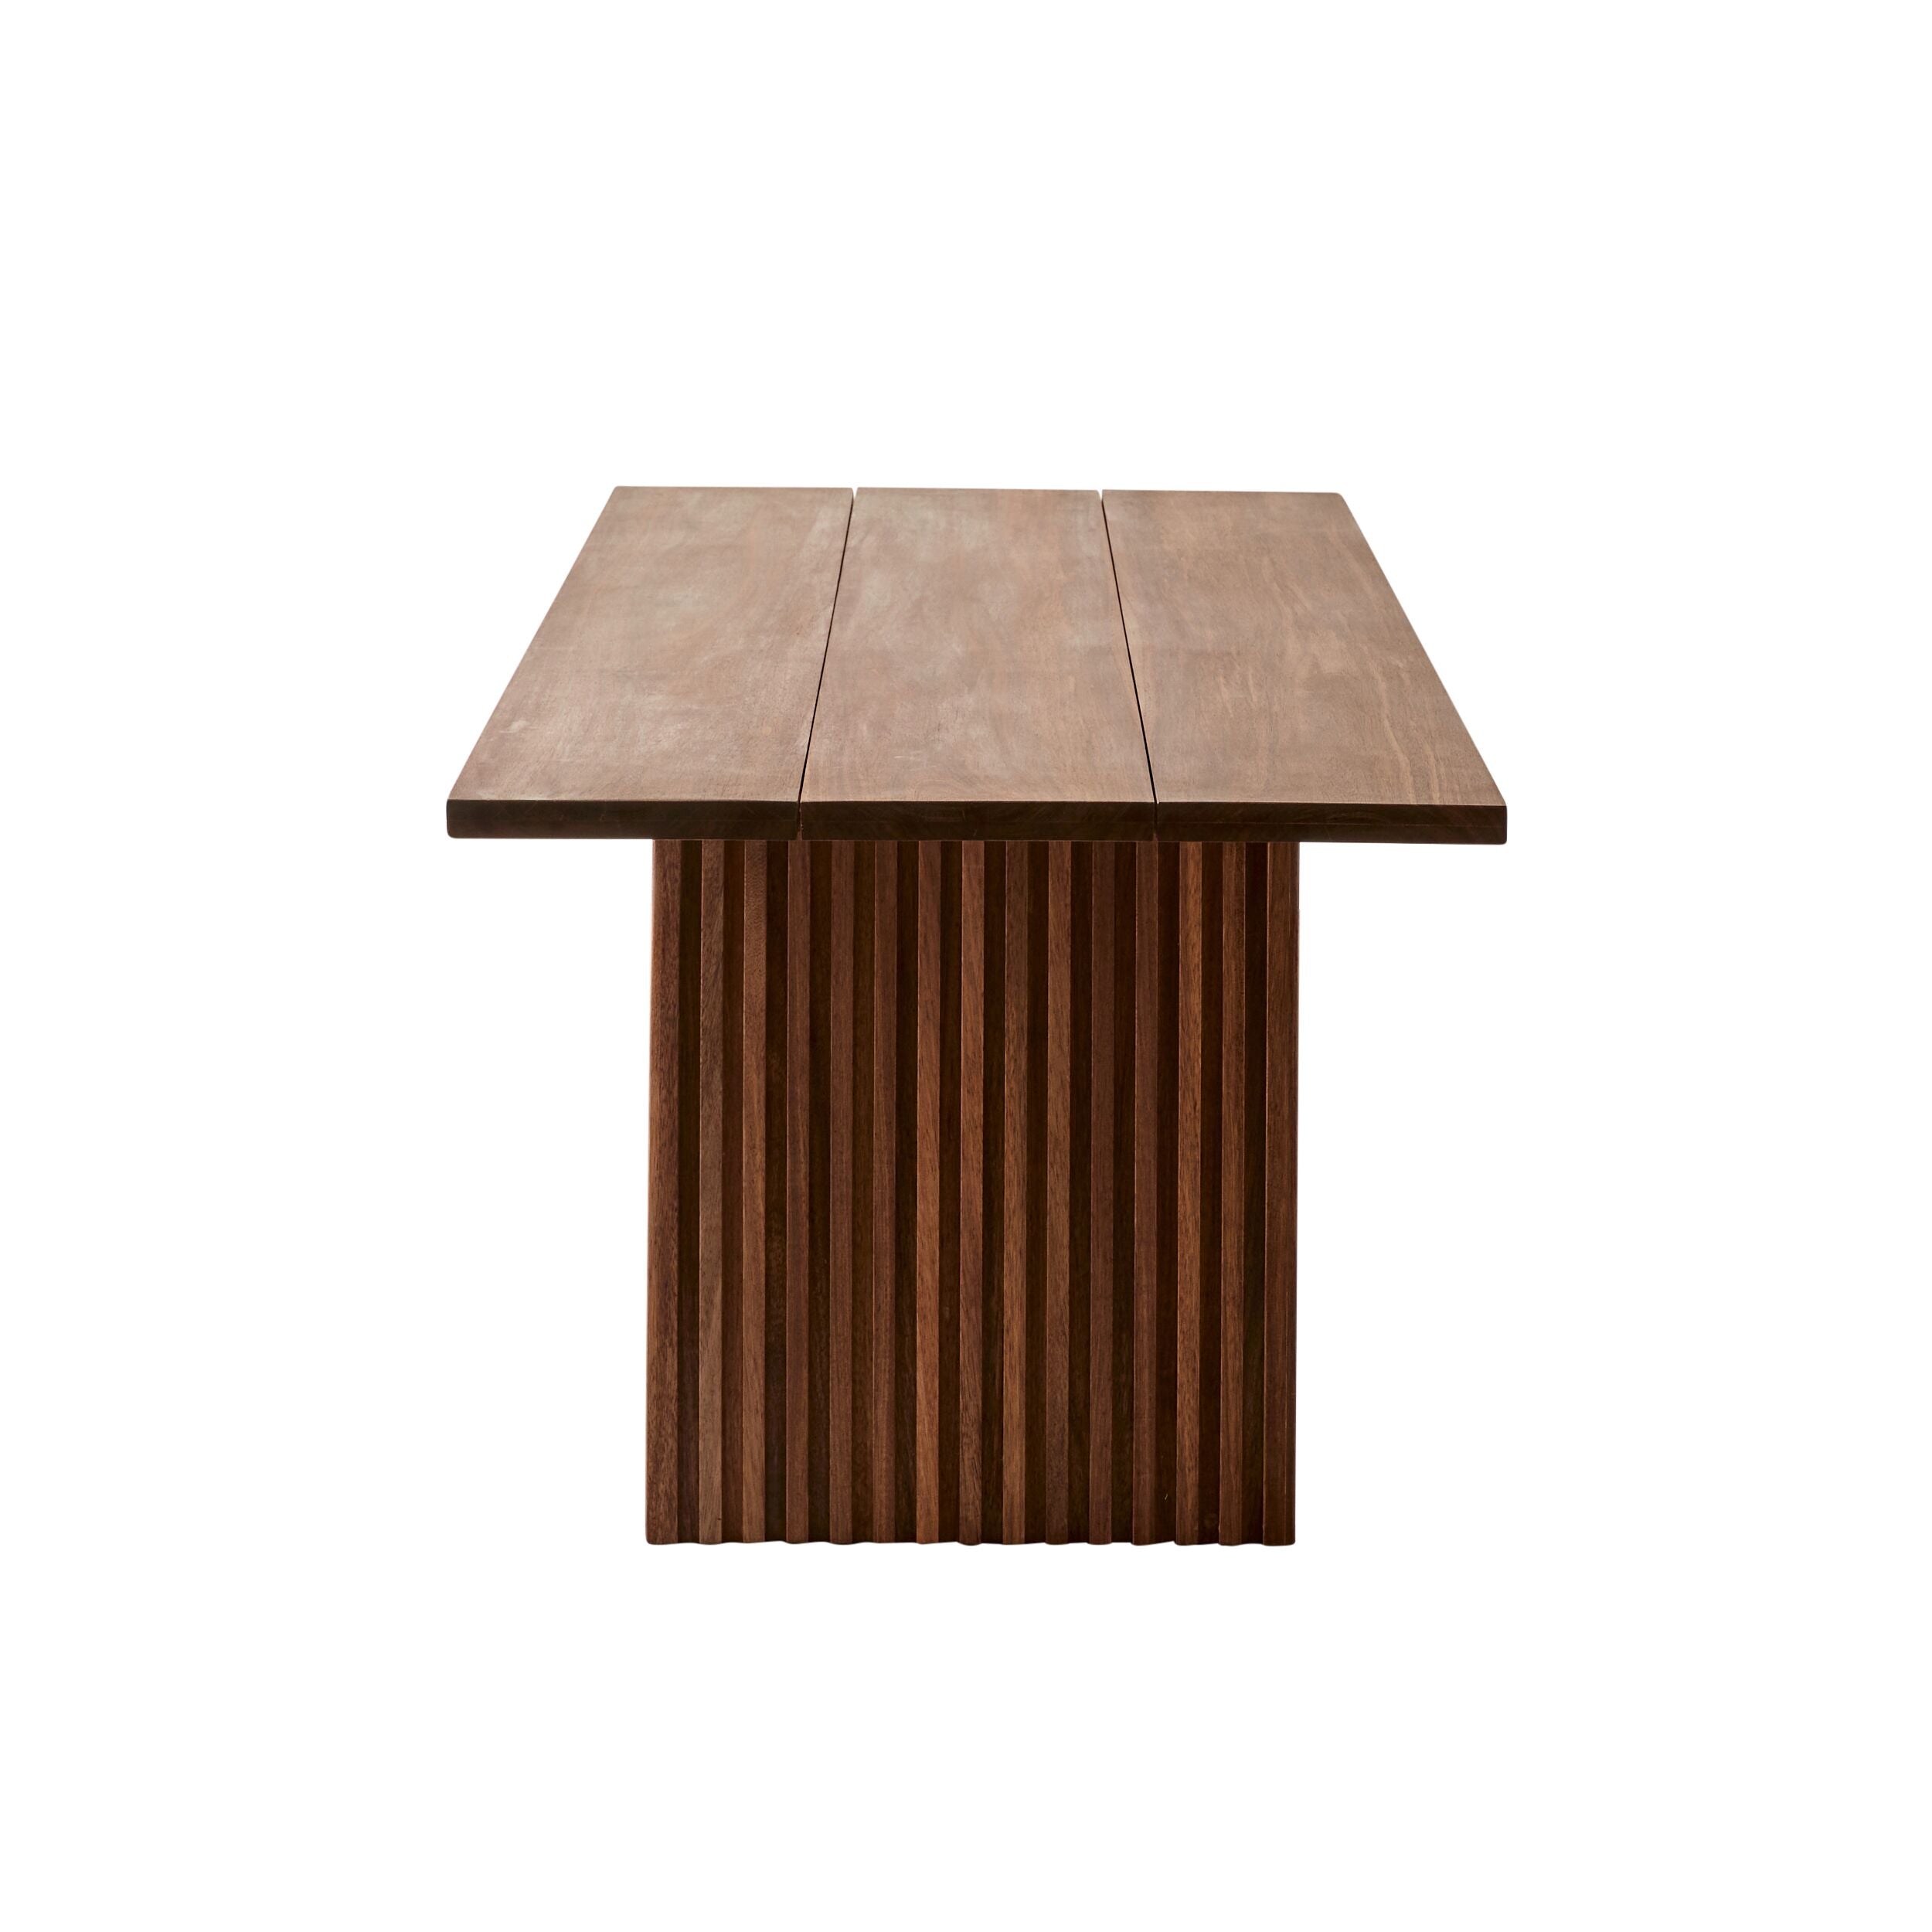 Oakey Outdoor Dining Table 240cm